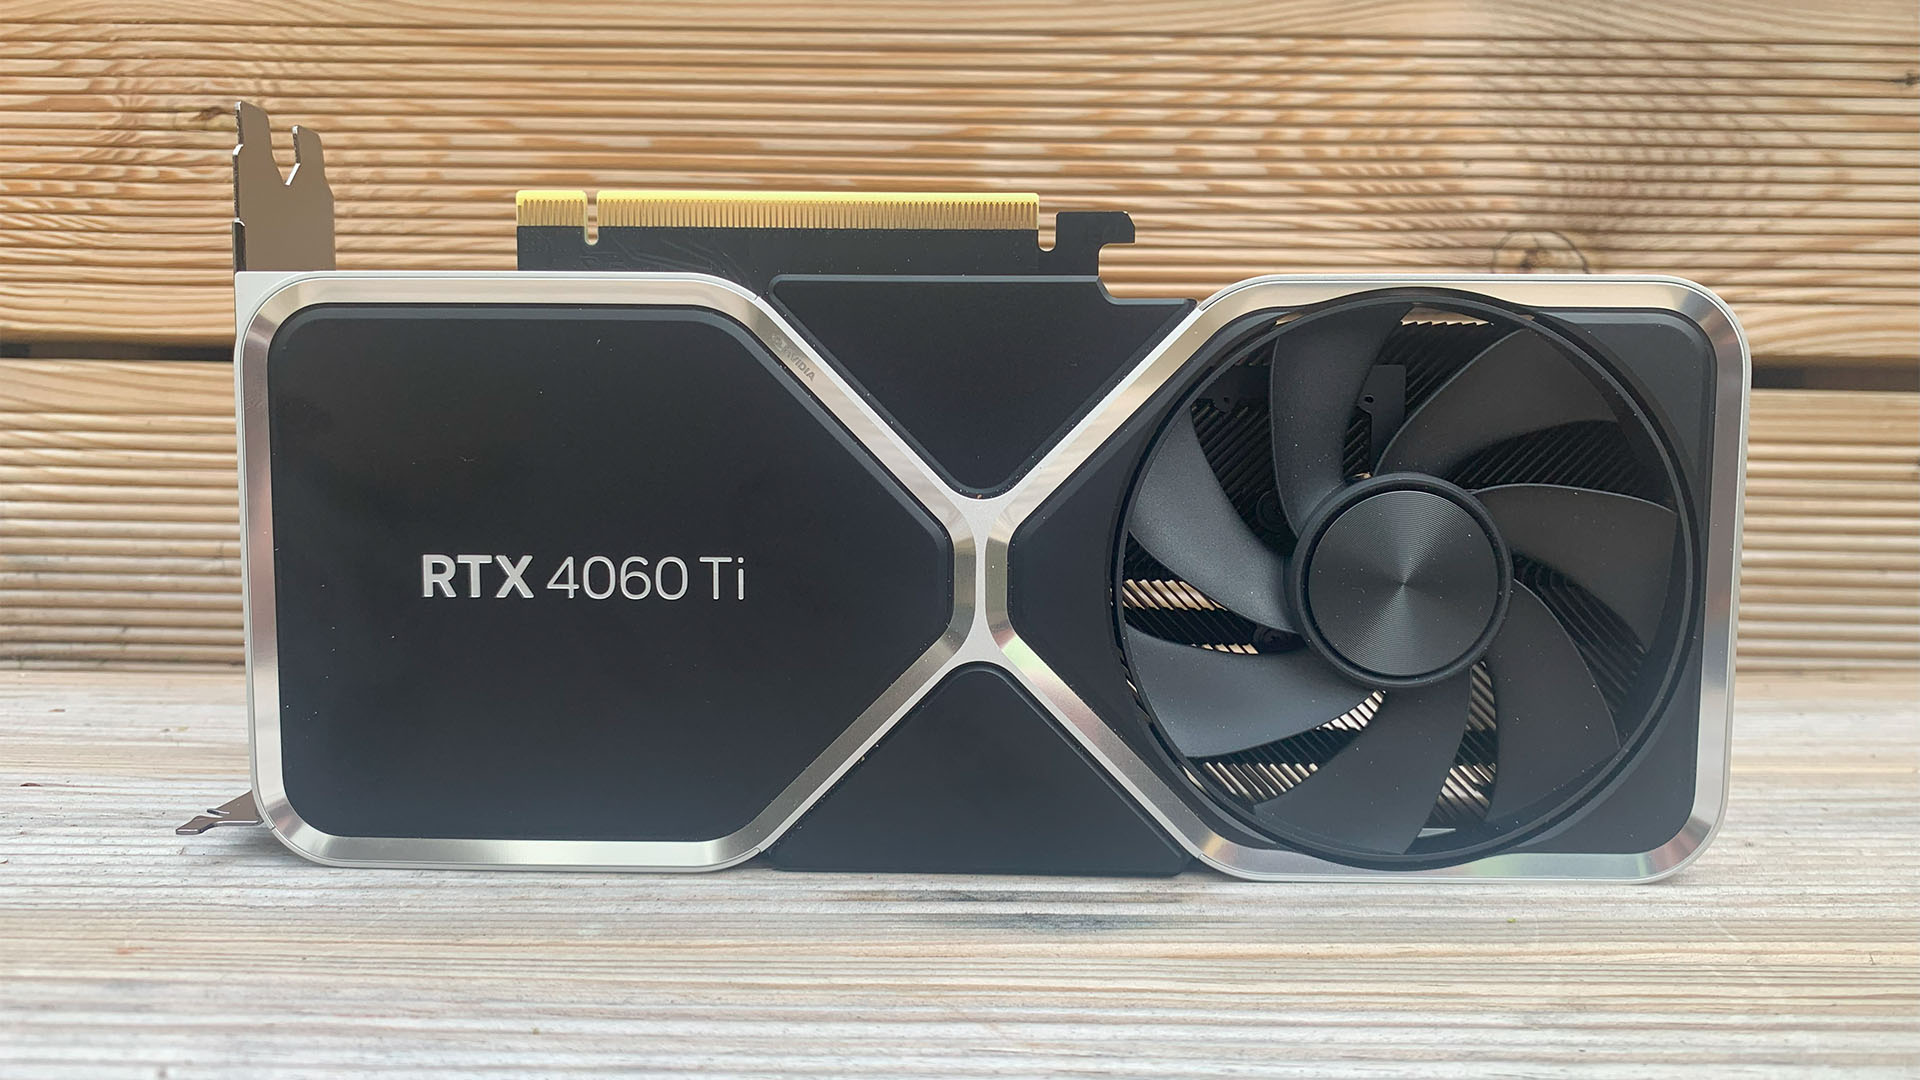 NVIDIA GeForce RTX 4060 Ti 16 GB Review - Twice the VRAM Making a